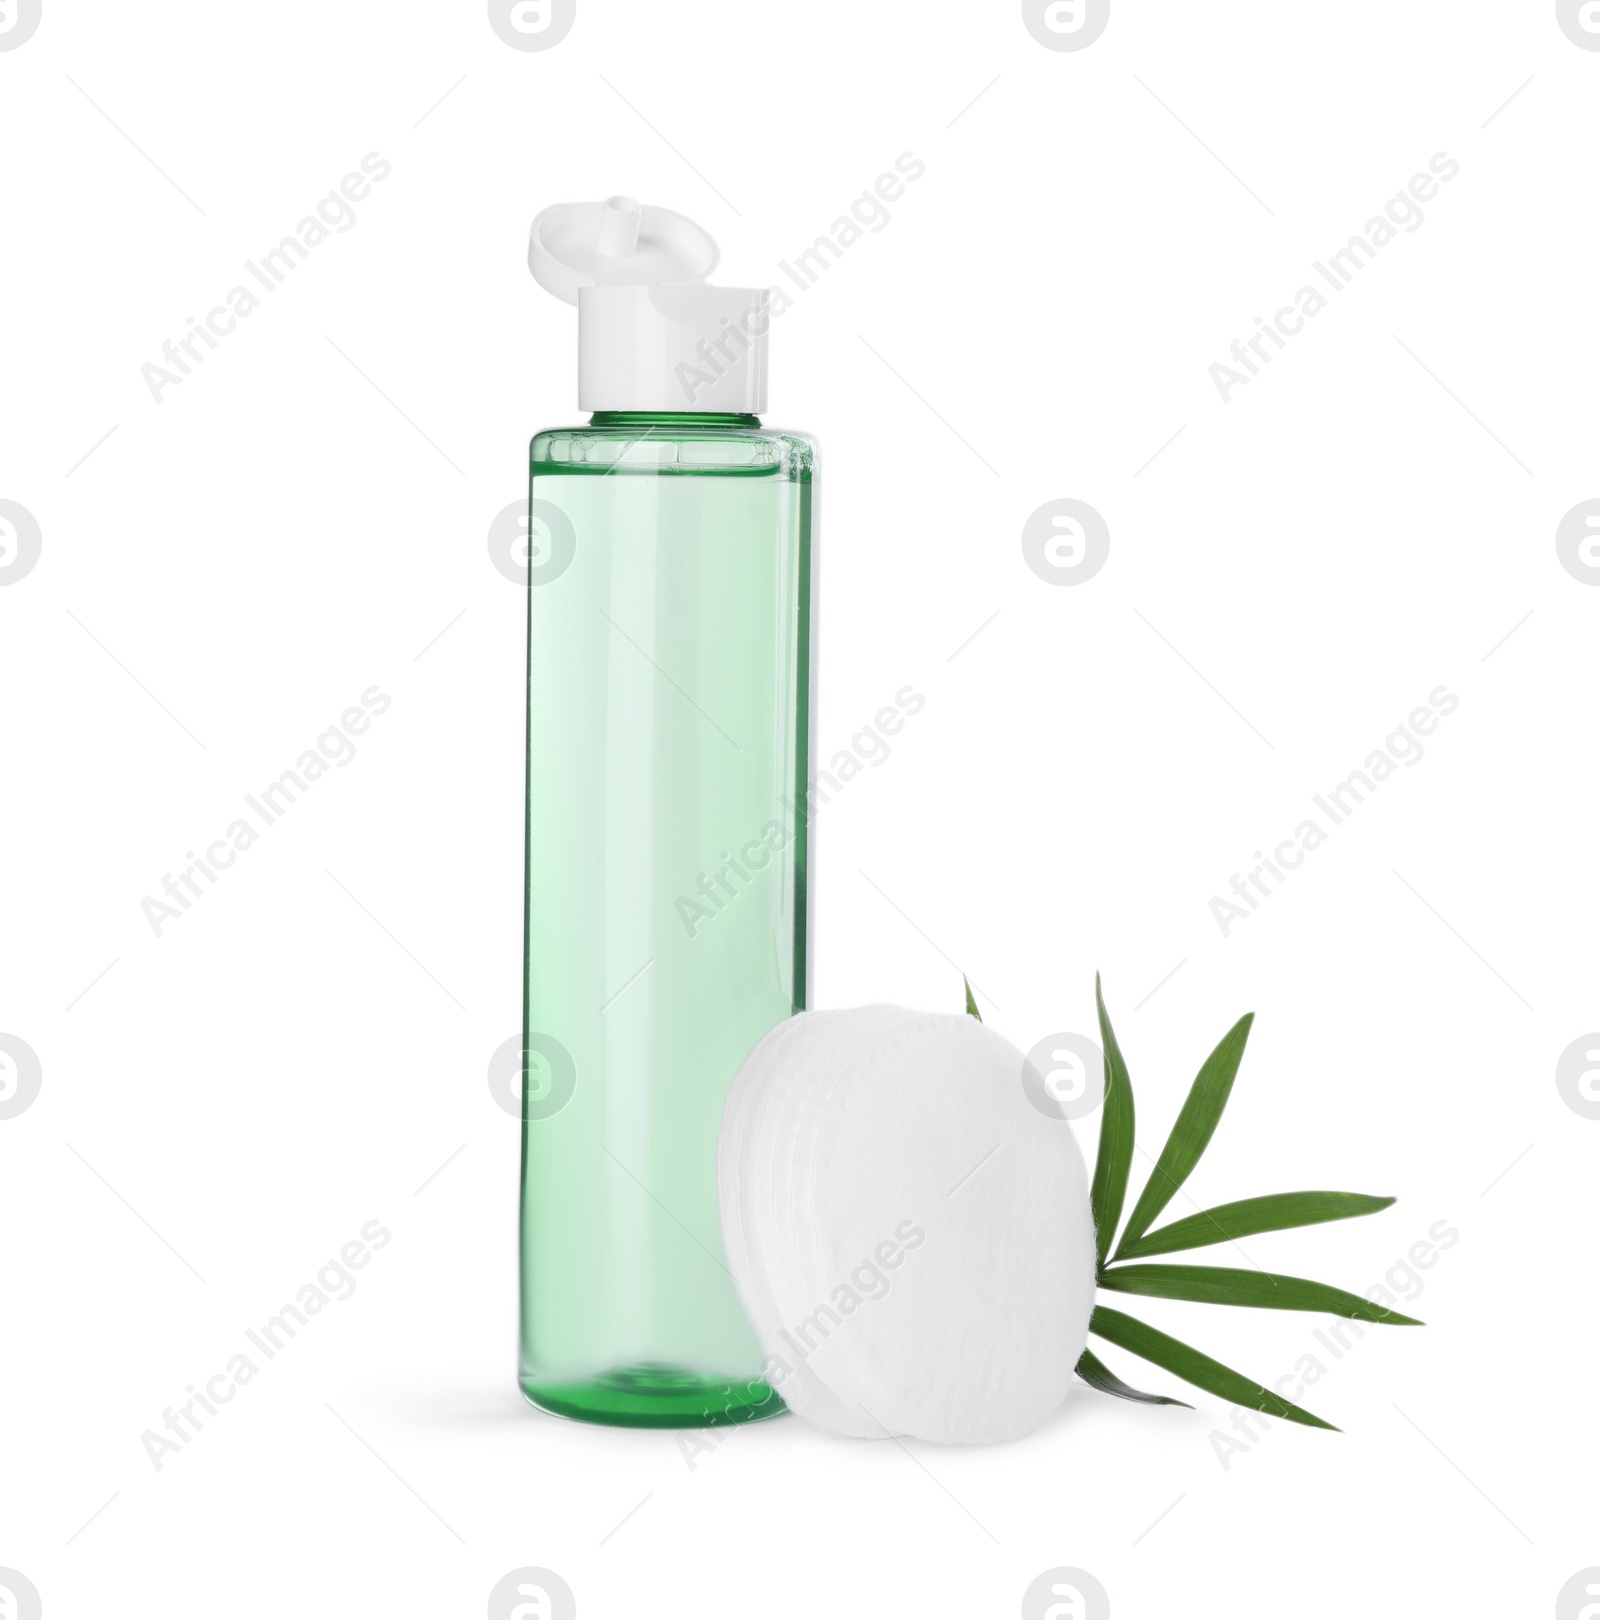 Photo of Bottle of micellar cleansing water, cotton pads and green twig on white background